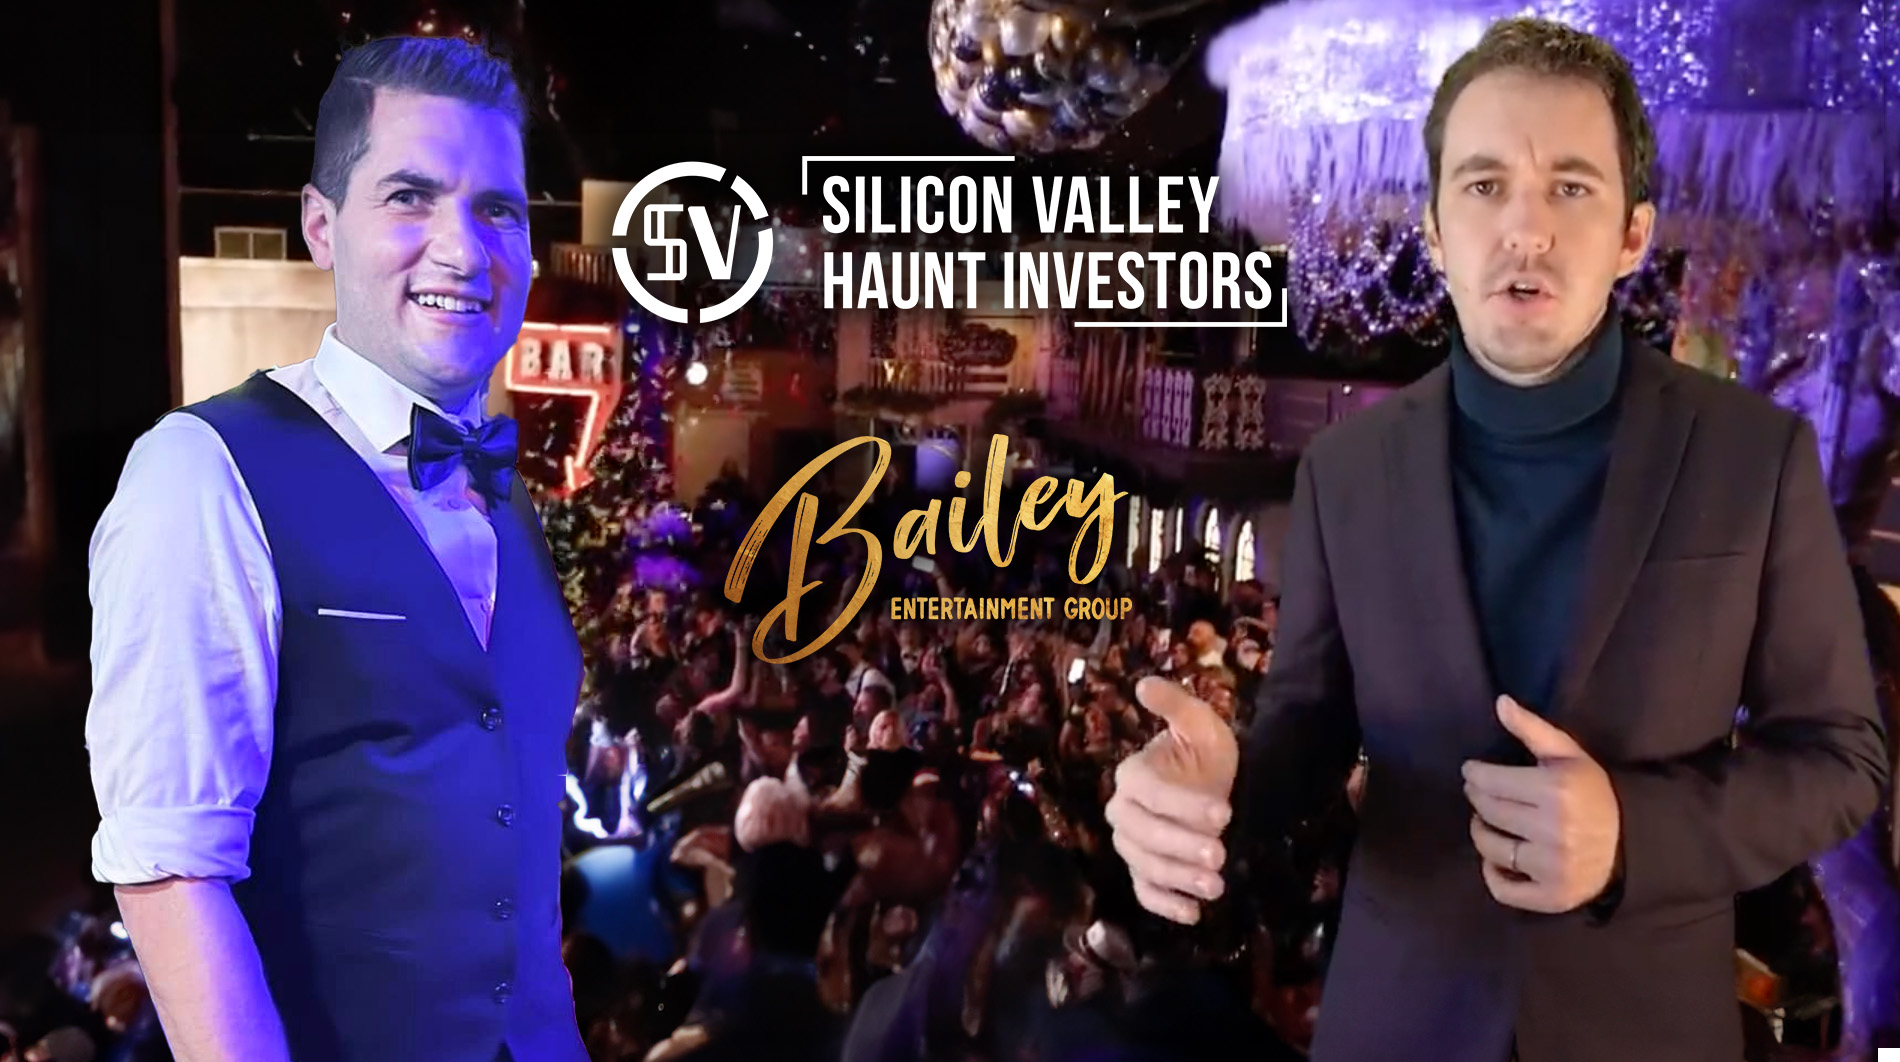 Silicon Valley Haunt Investors and Bailey Entertainment Group Forge Strategic Partnership